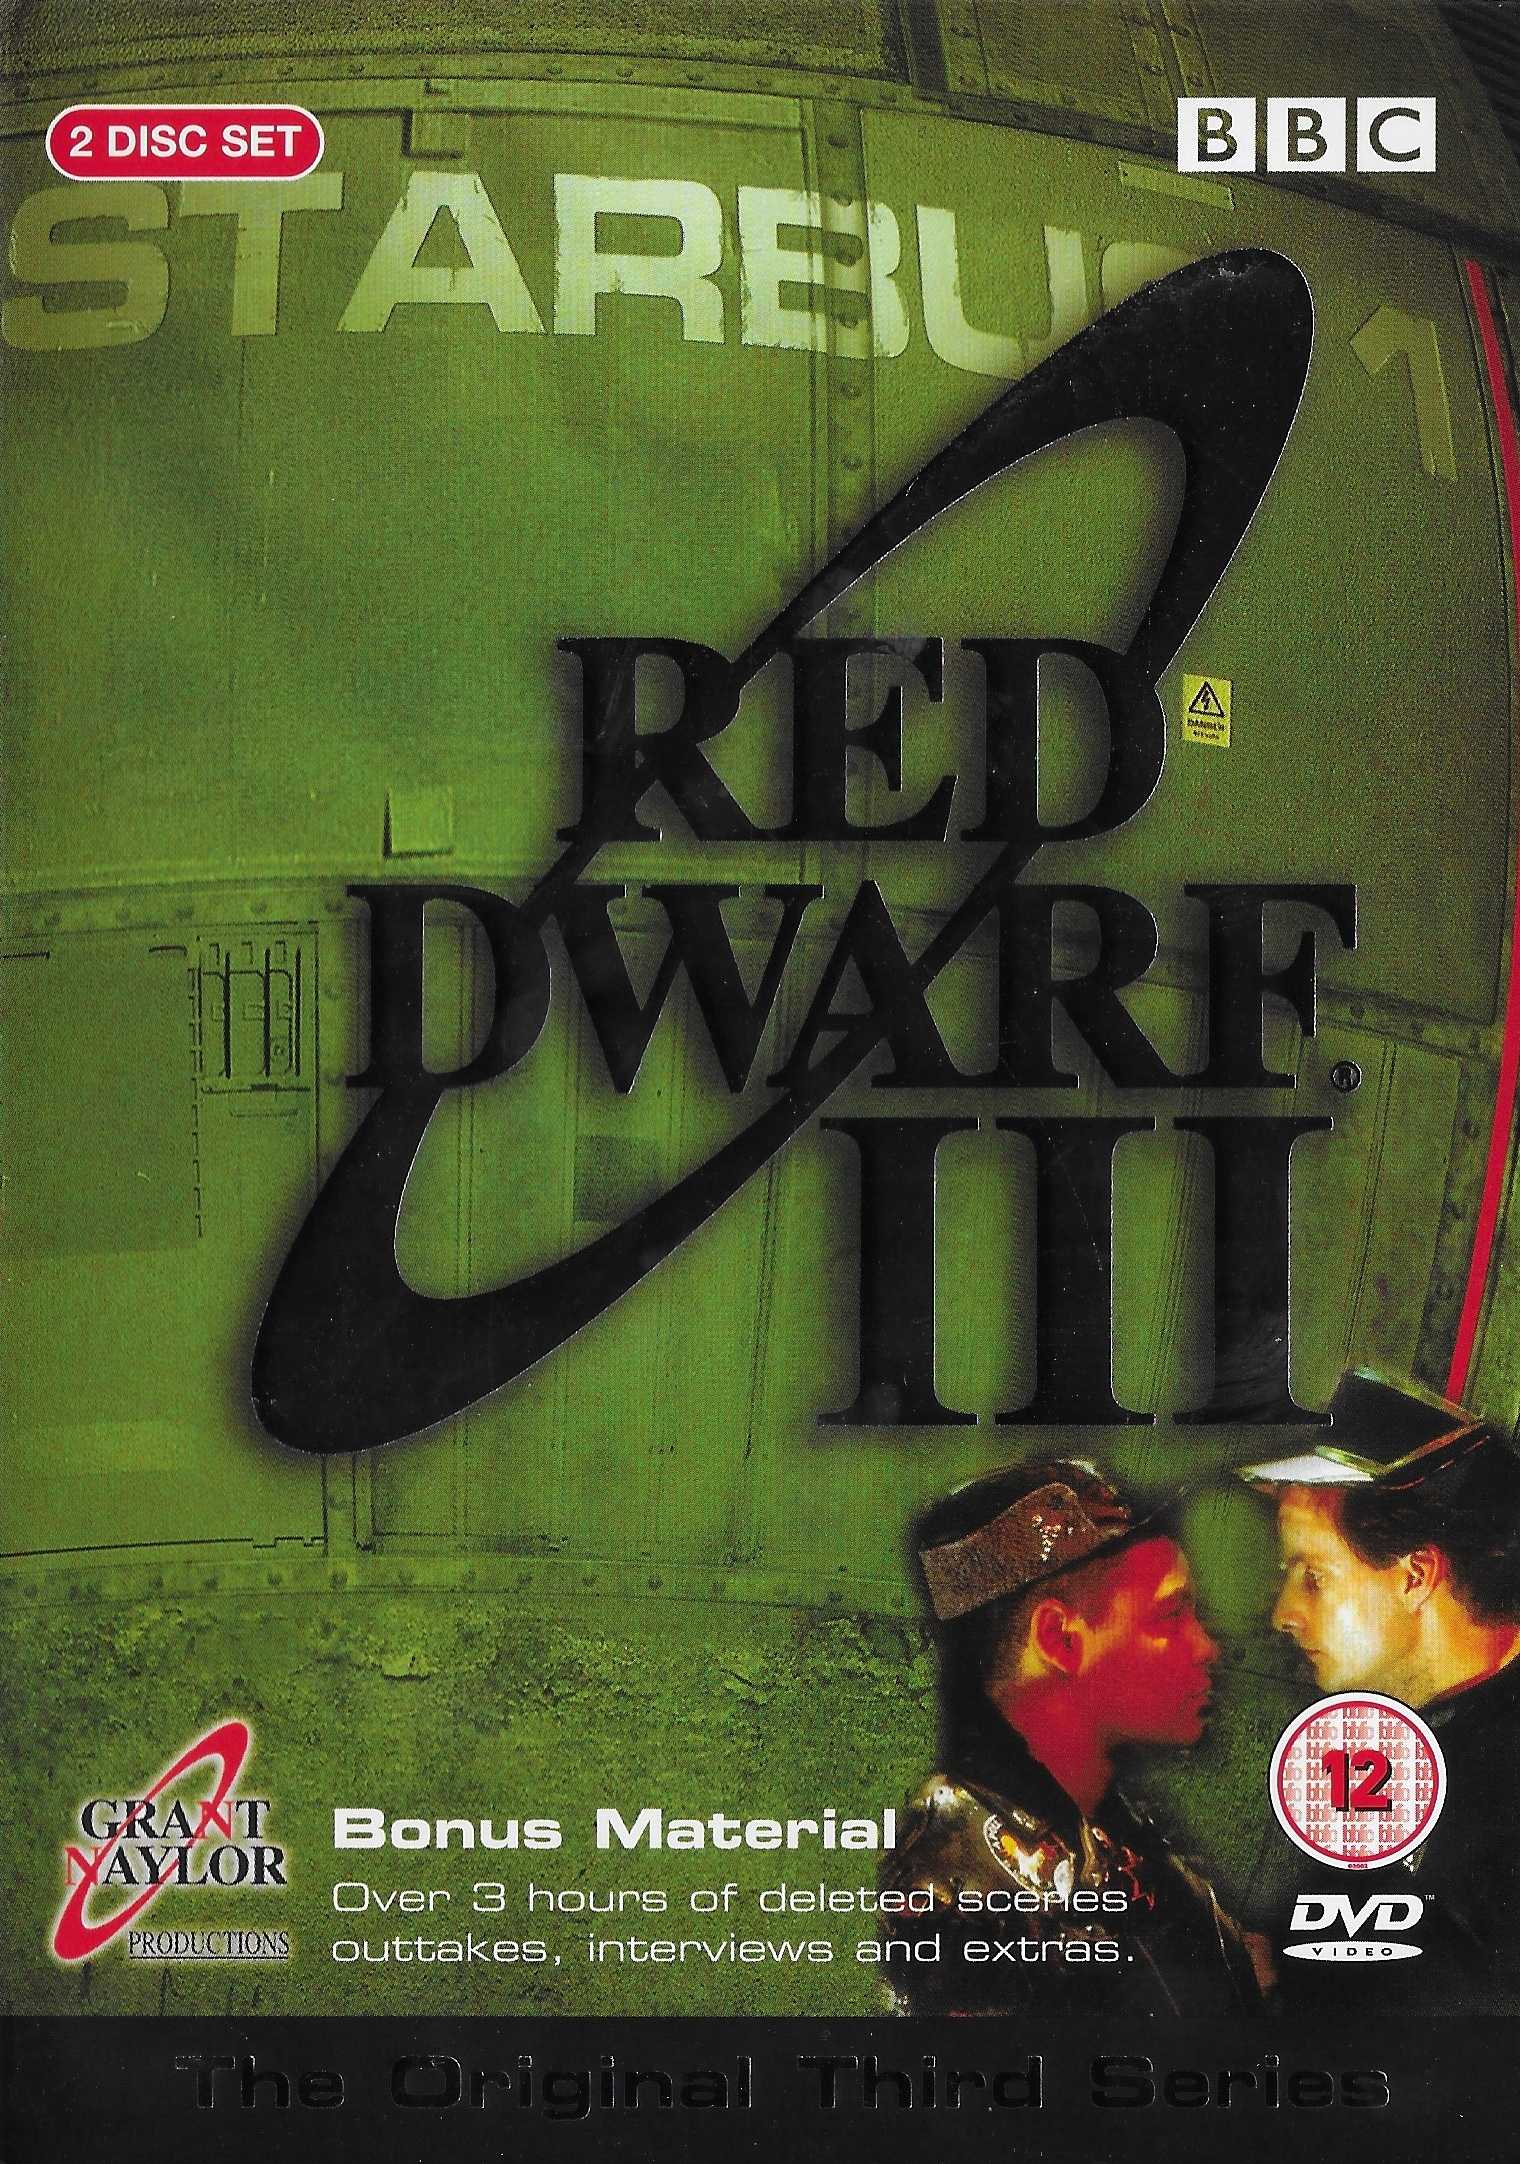 Picture of BBCDVD 1215 Red dwarf - Series III by artist Rob Grant / Doug Naylor from the BBC dvds - Records and Tapes library